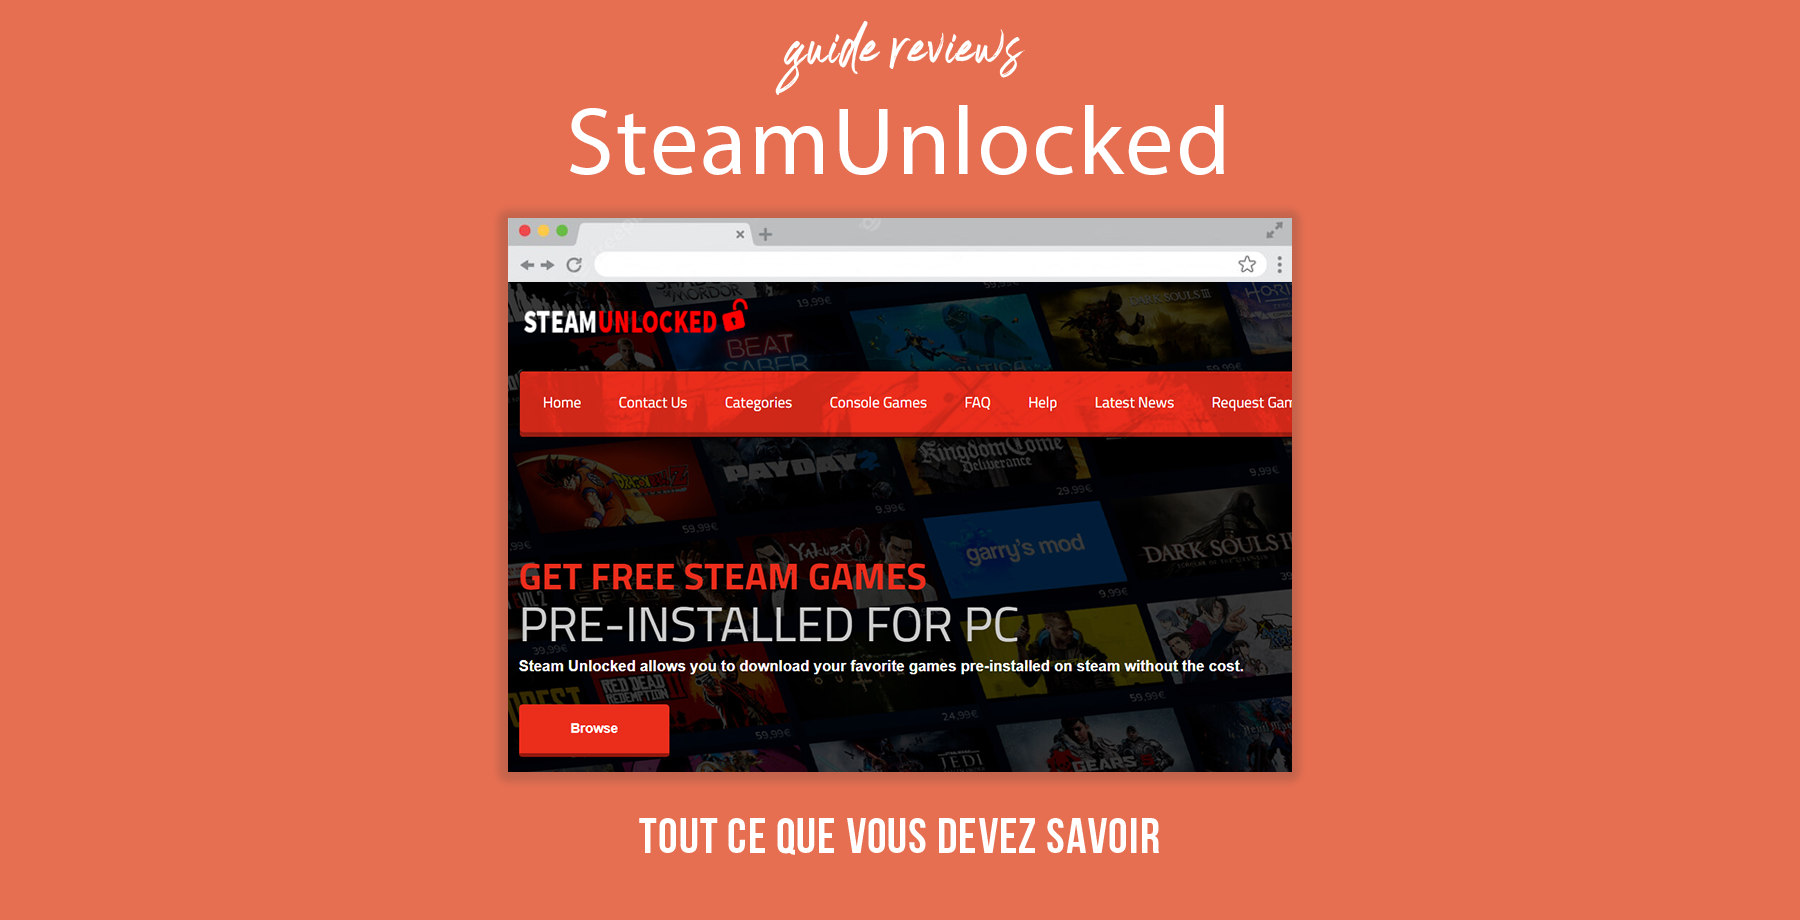 Is Steamunlocked a Trustworthy Source for Game Downloads